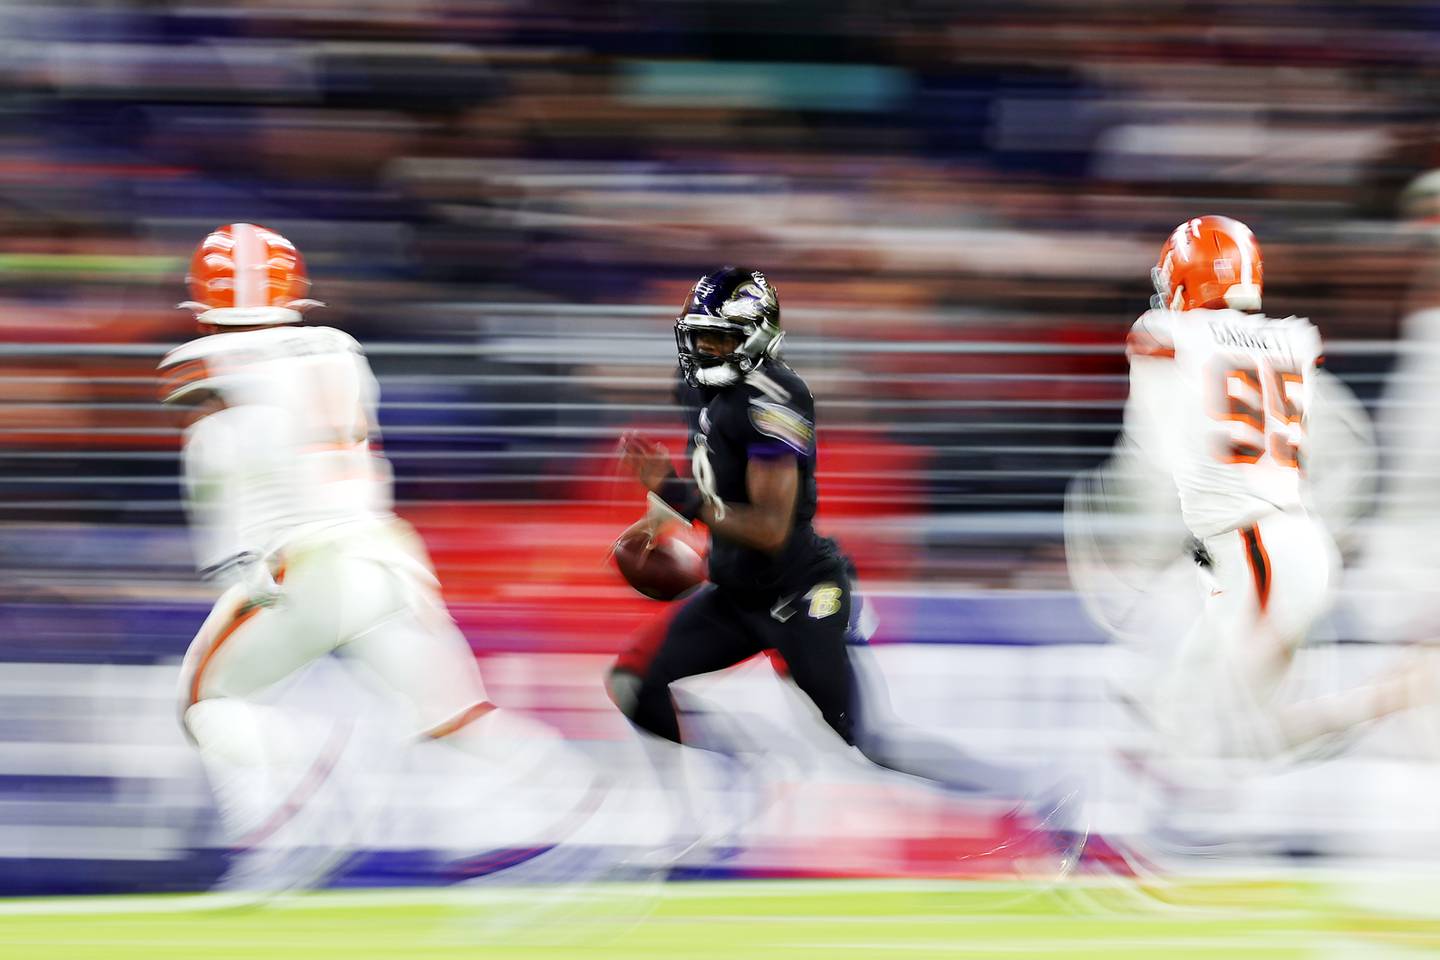 Lamar Jackson #8 of the Baltimore Ravens scrambles during a game against the Cleveland Browns at M&T Bank Stadium on November 28, 2021.